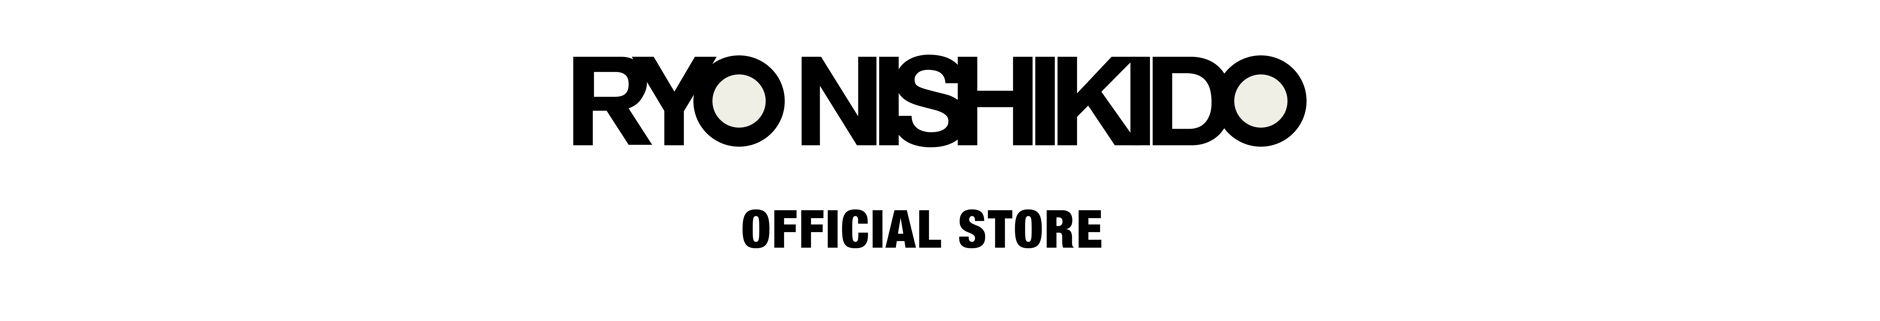 RYONISHIKIDO  OFFICIAL STORE